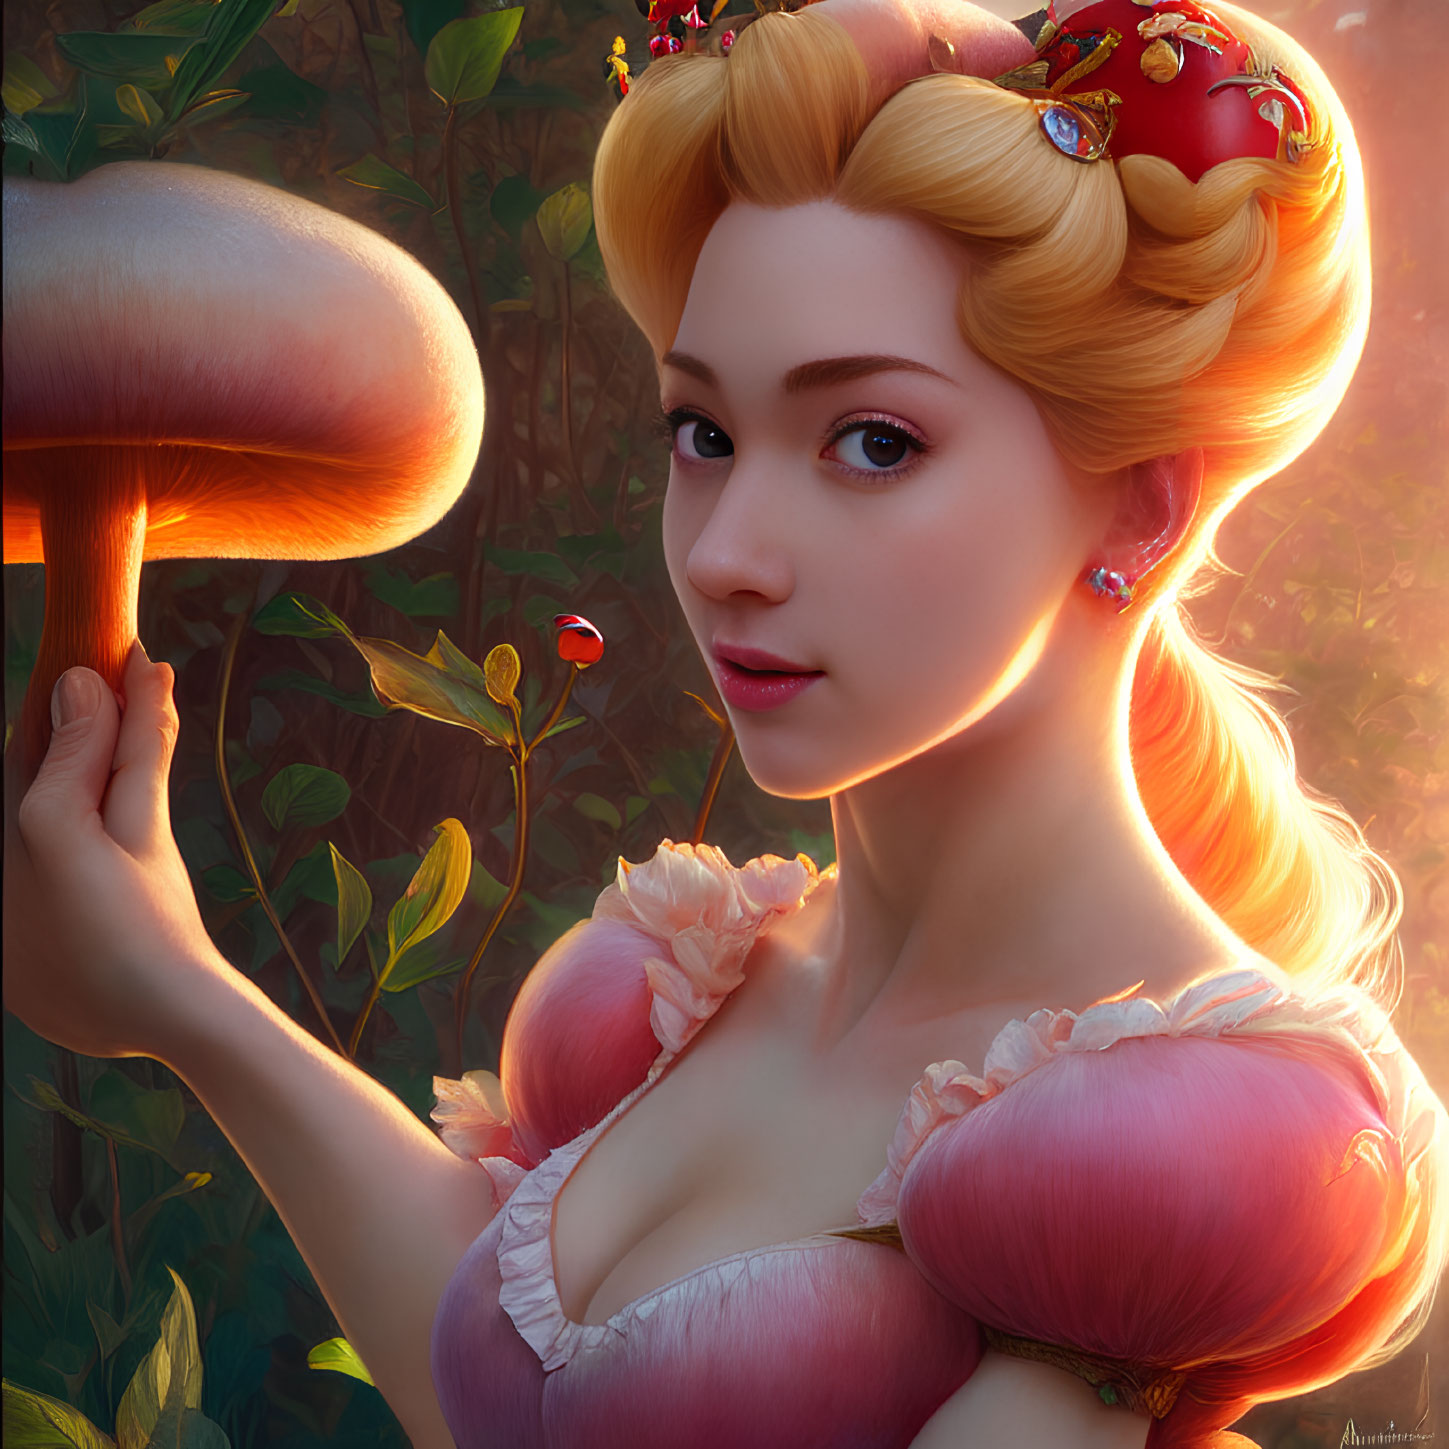 Golden-haired woman with red headband and giant mushroom in lush greenery.